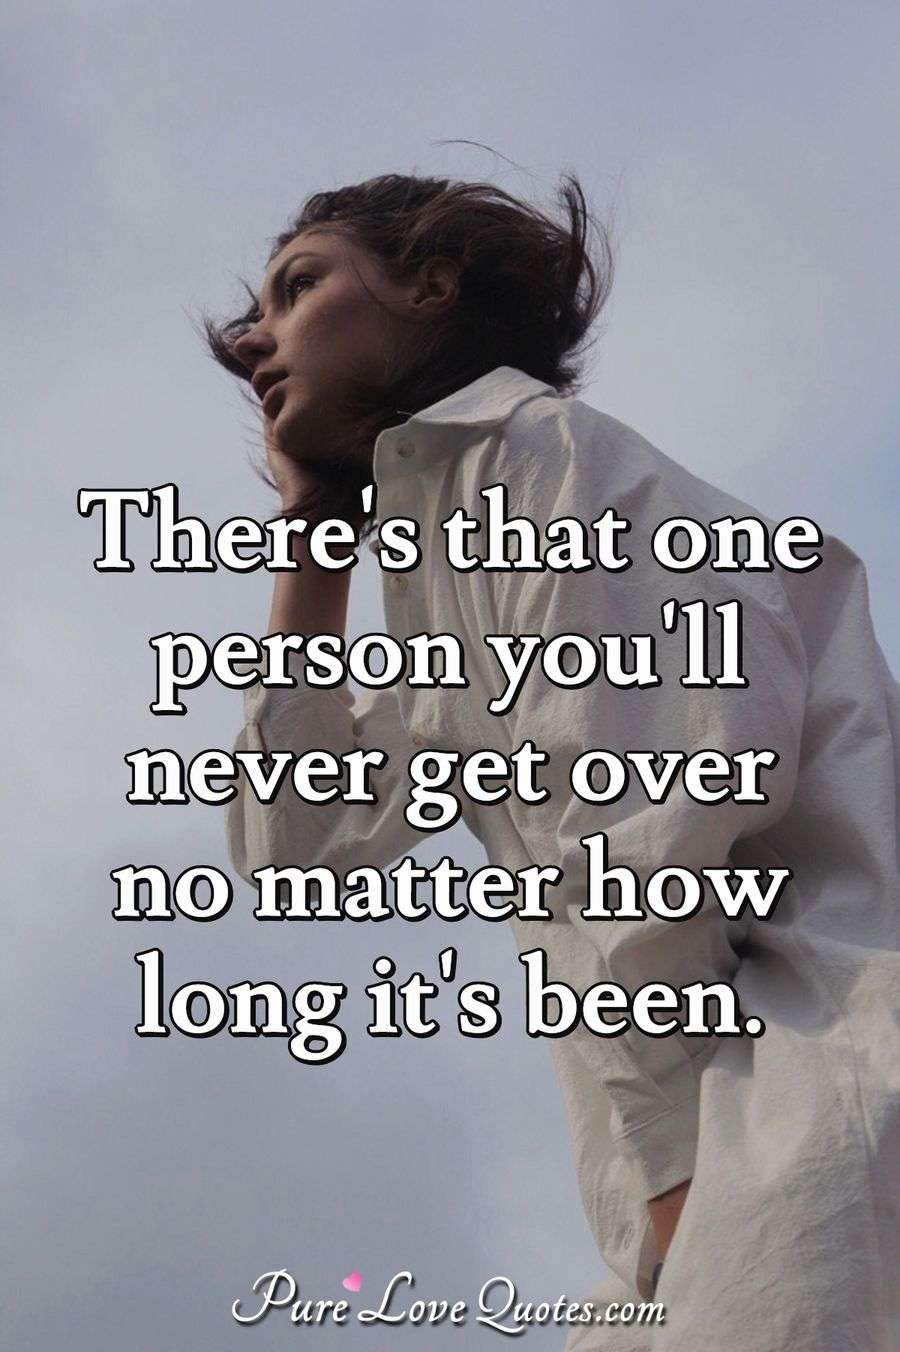 Theres That One Person Youll Never Get Over No Matter How Long Its Been Purelovequotes